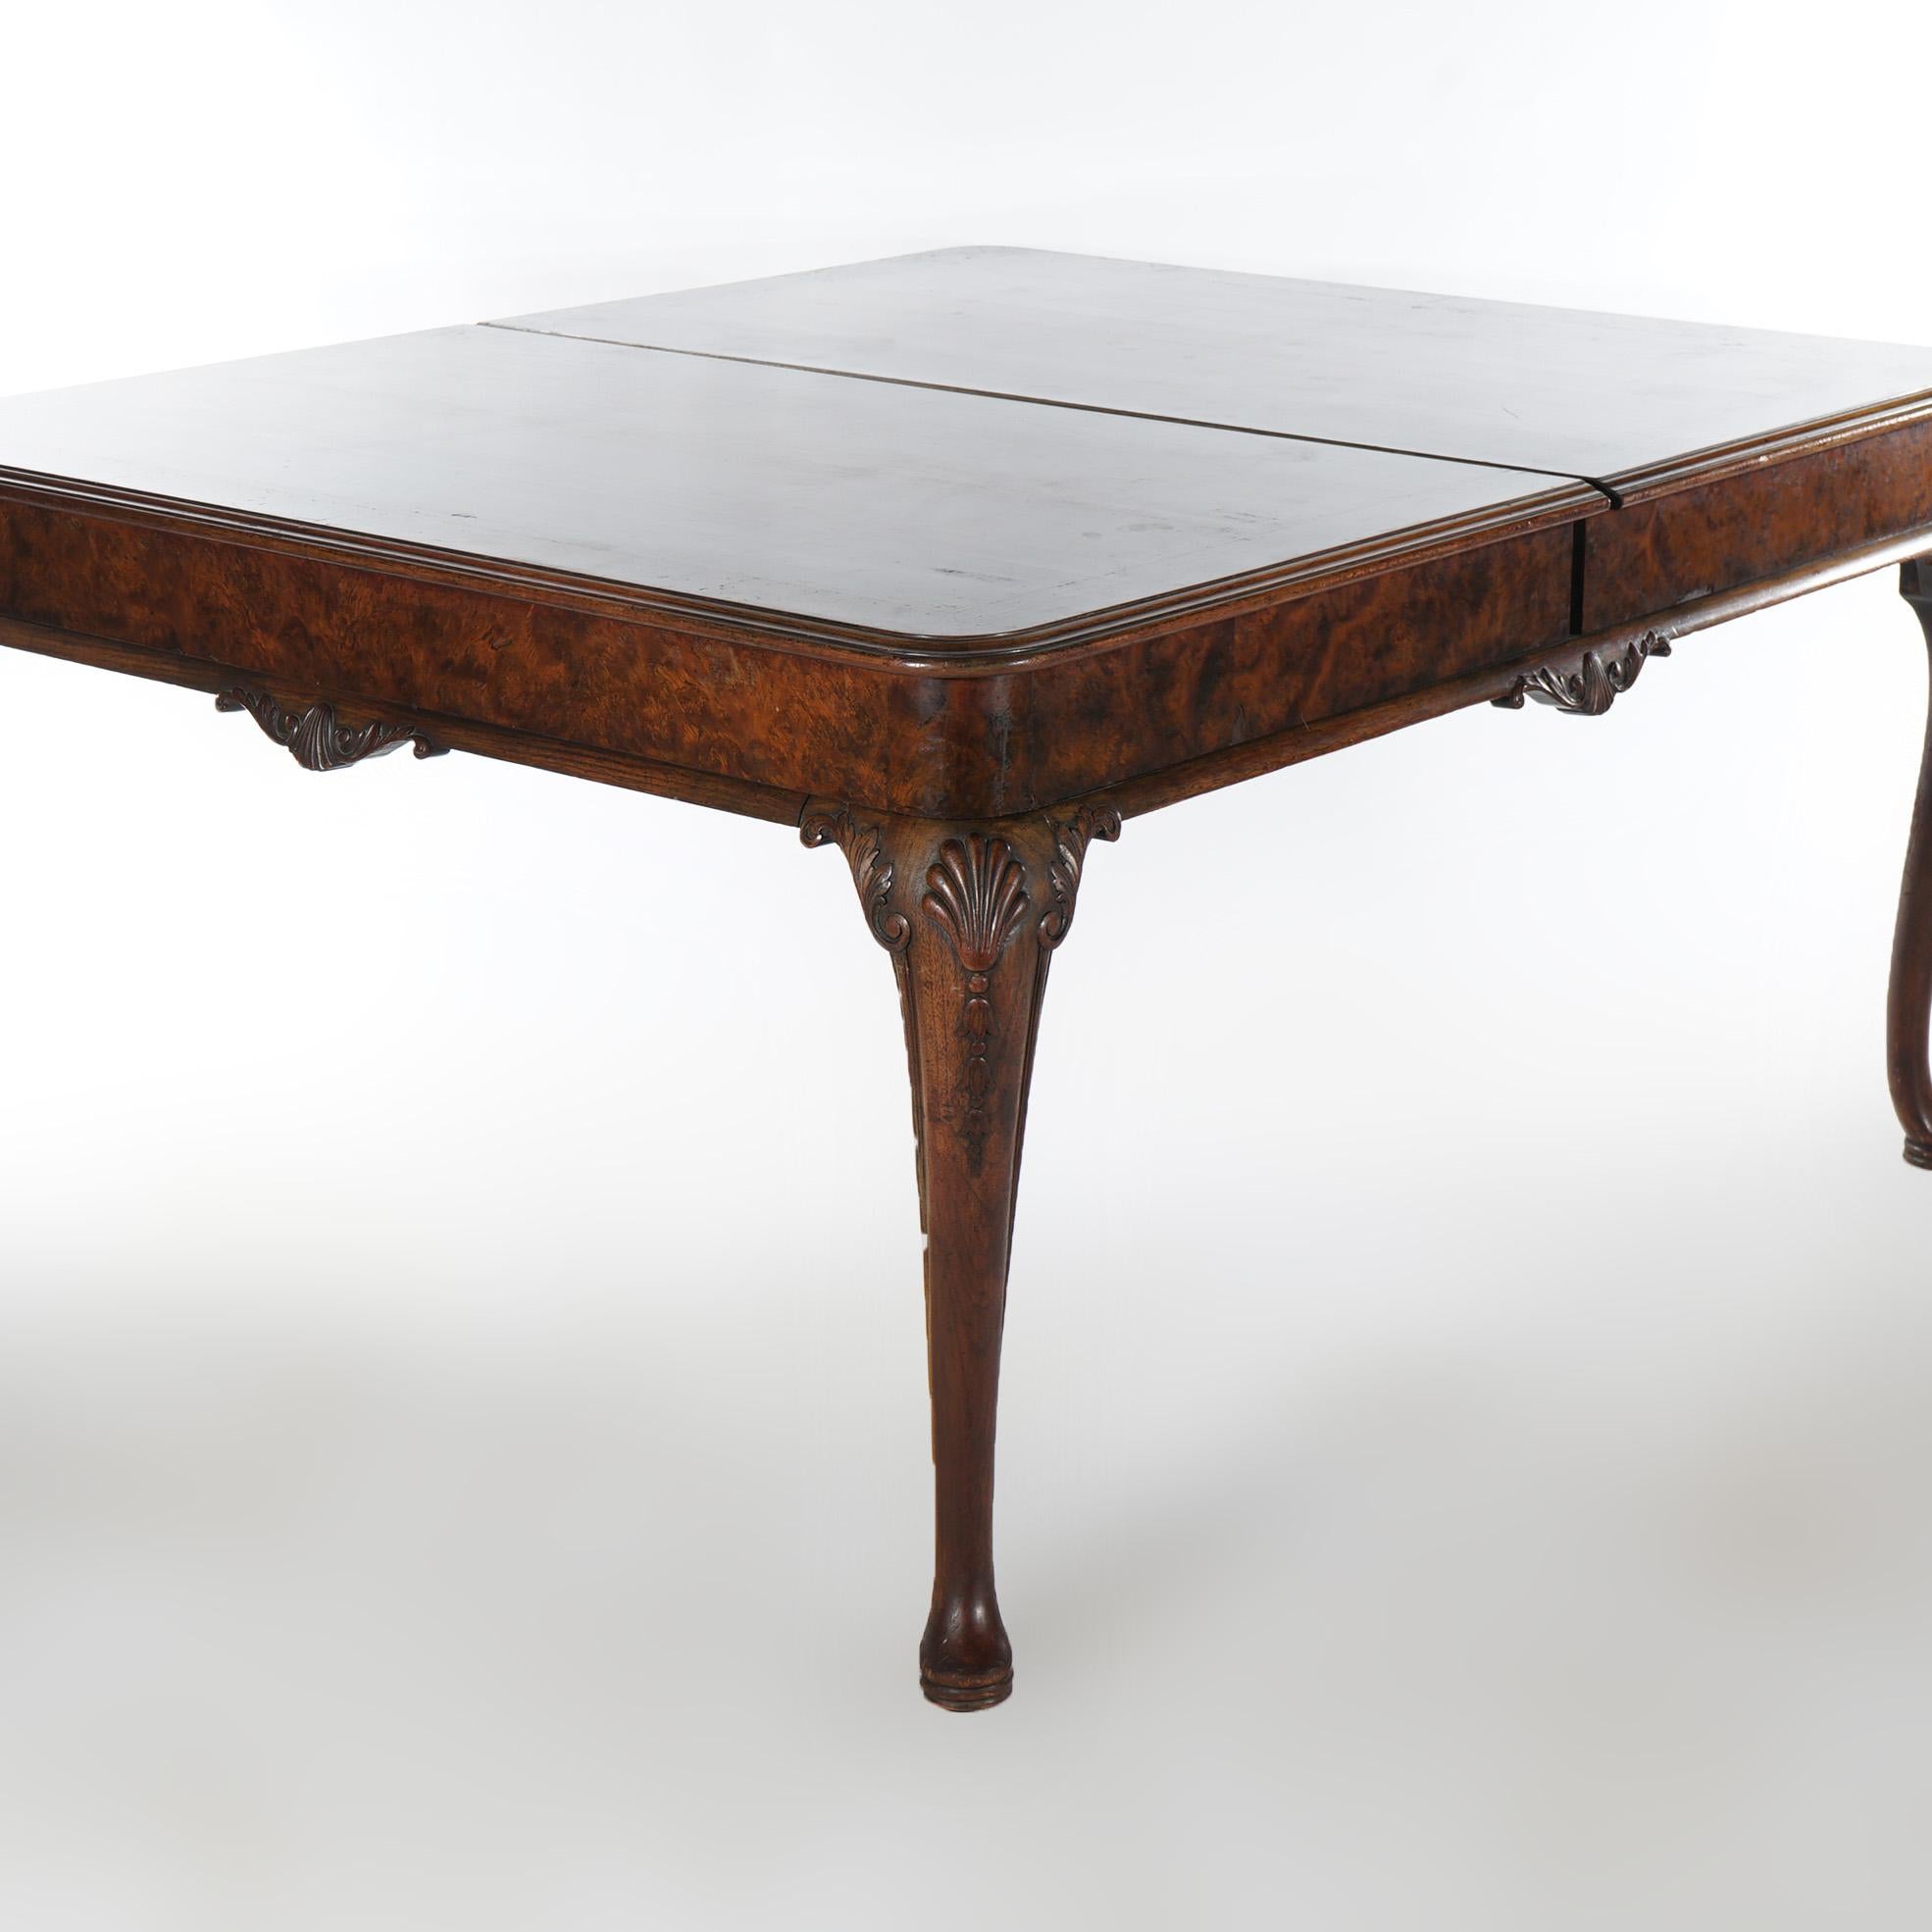 Antique Queen Anne Style Mahogany Banded Inlaid Dining Table & Two Leaves 1930 For Sale 10